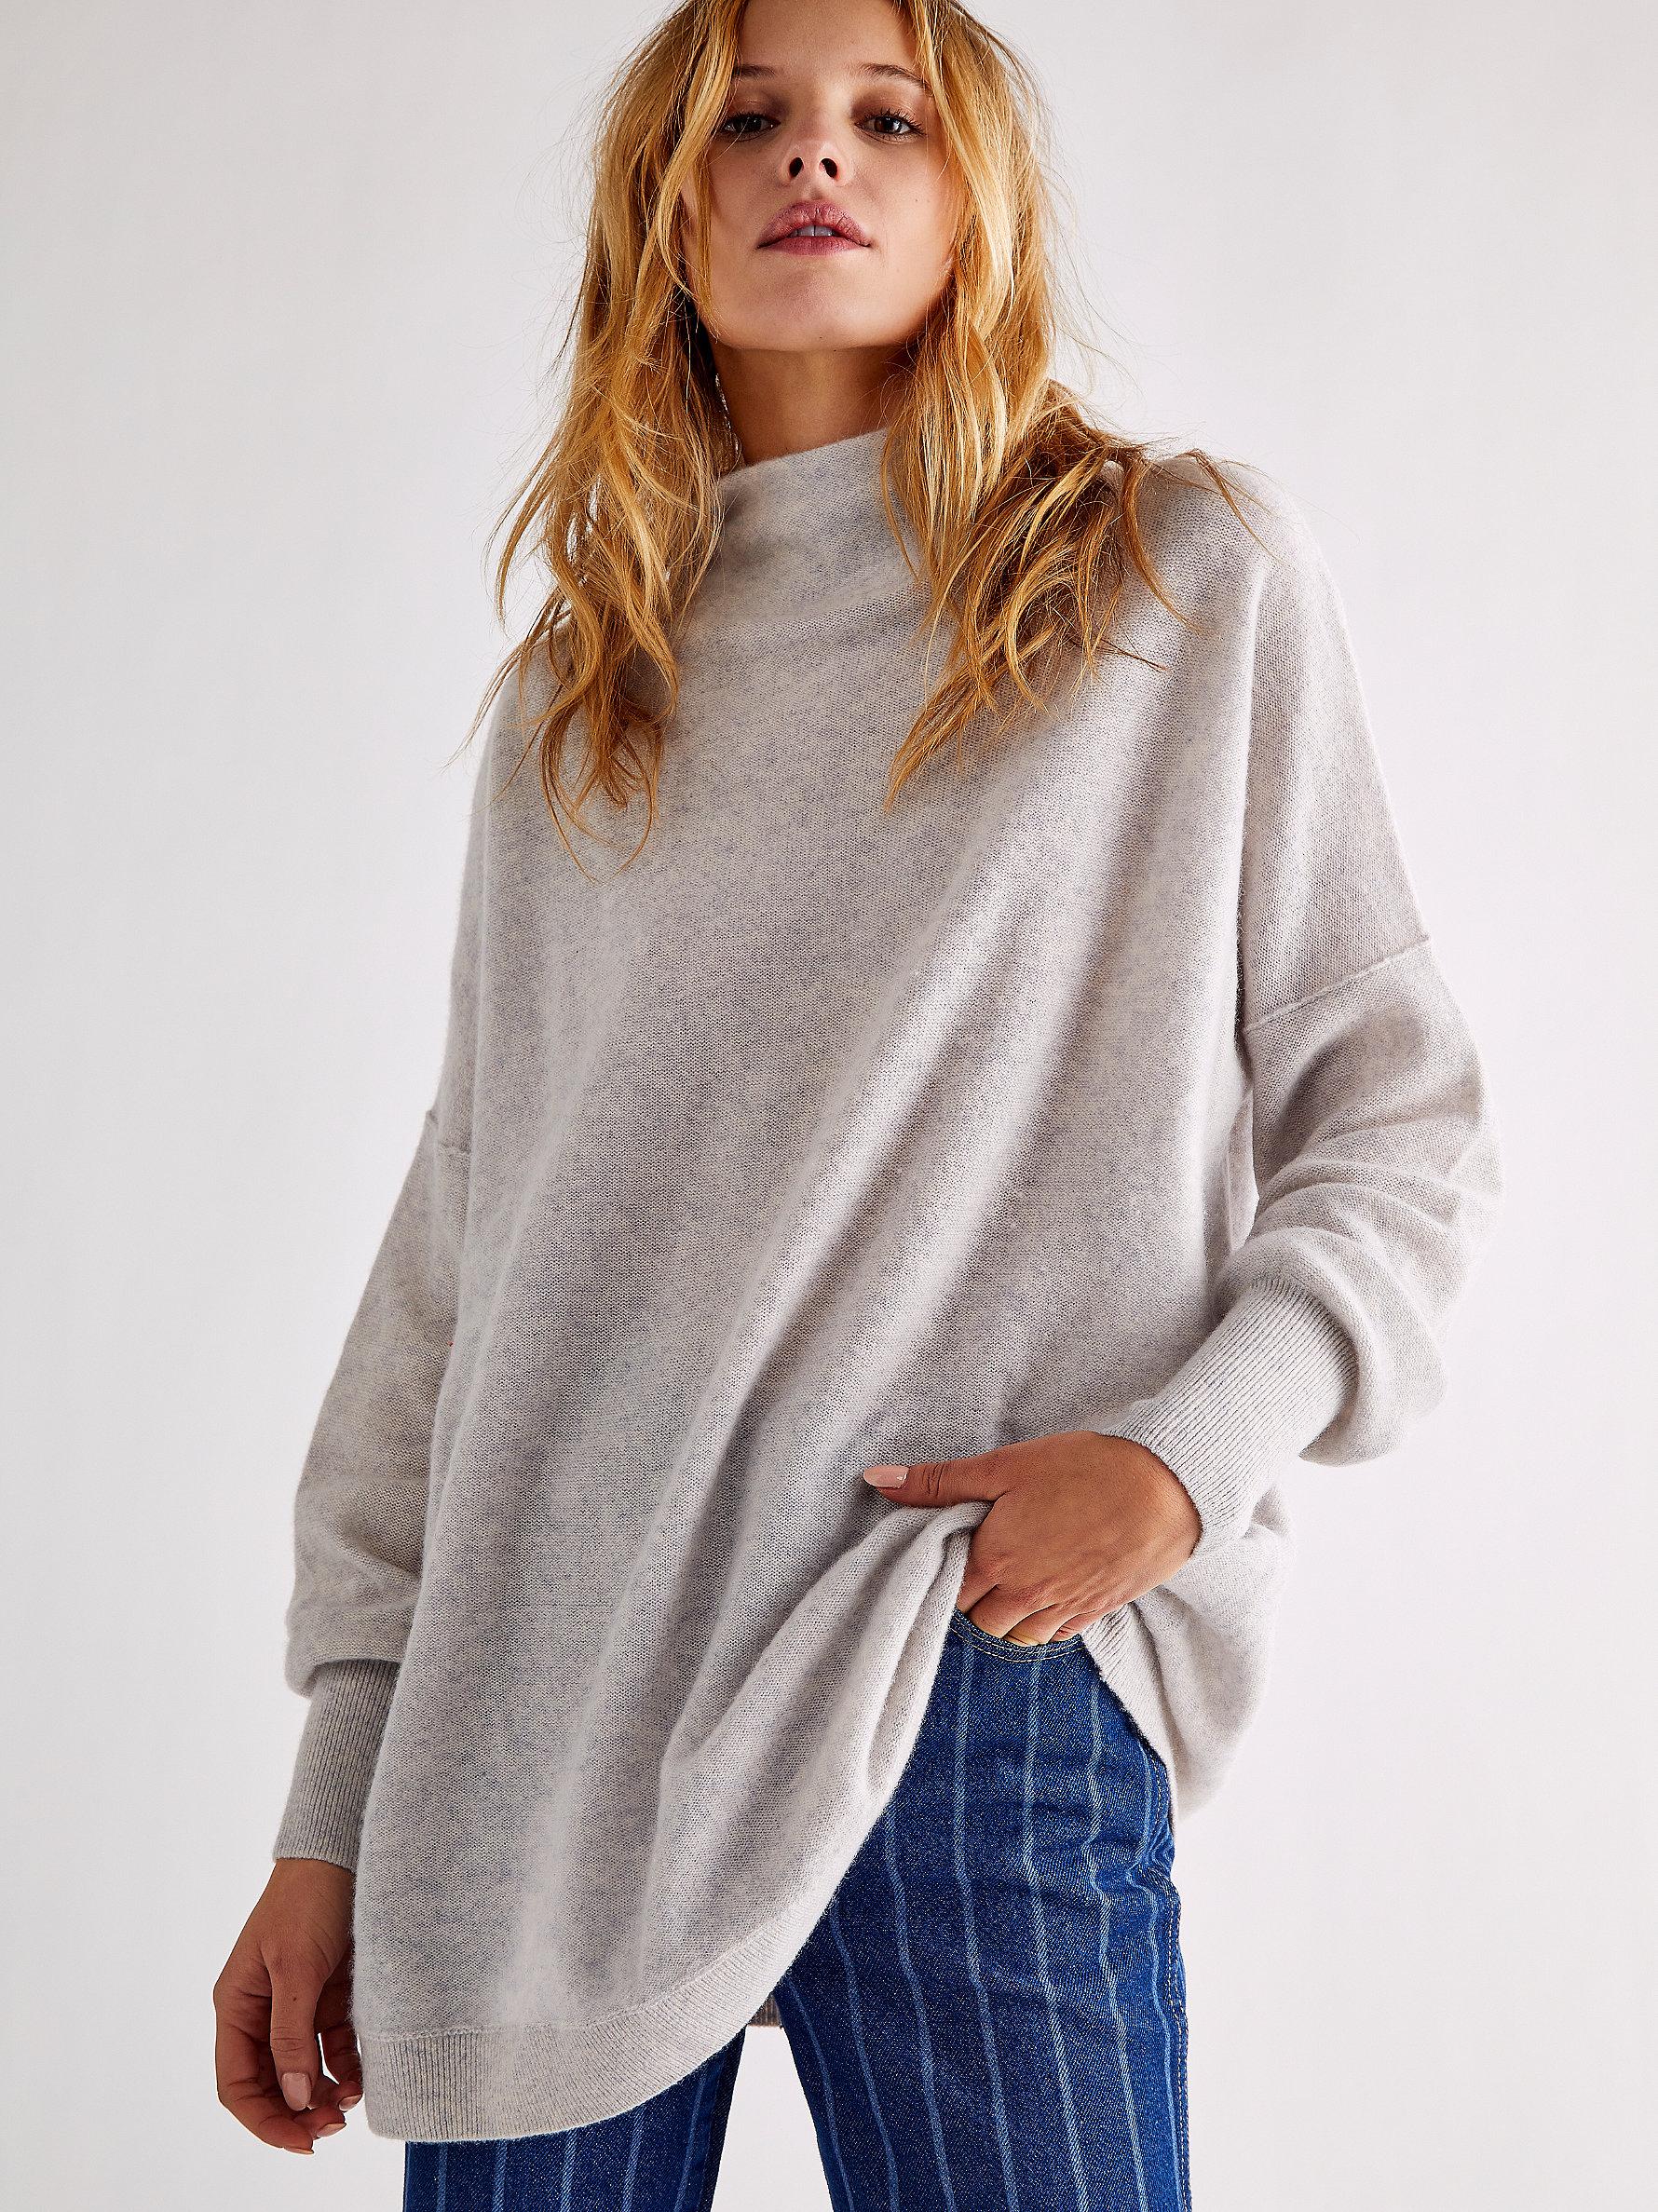 Free People Ottoman Cashmere Tunic in Gray